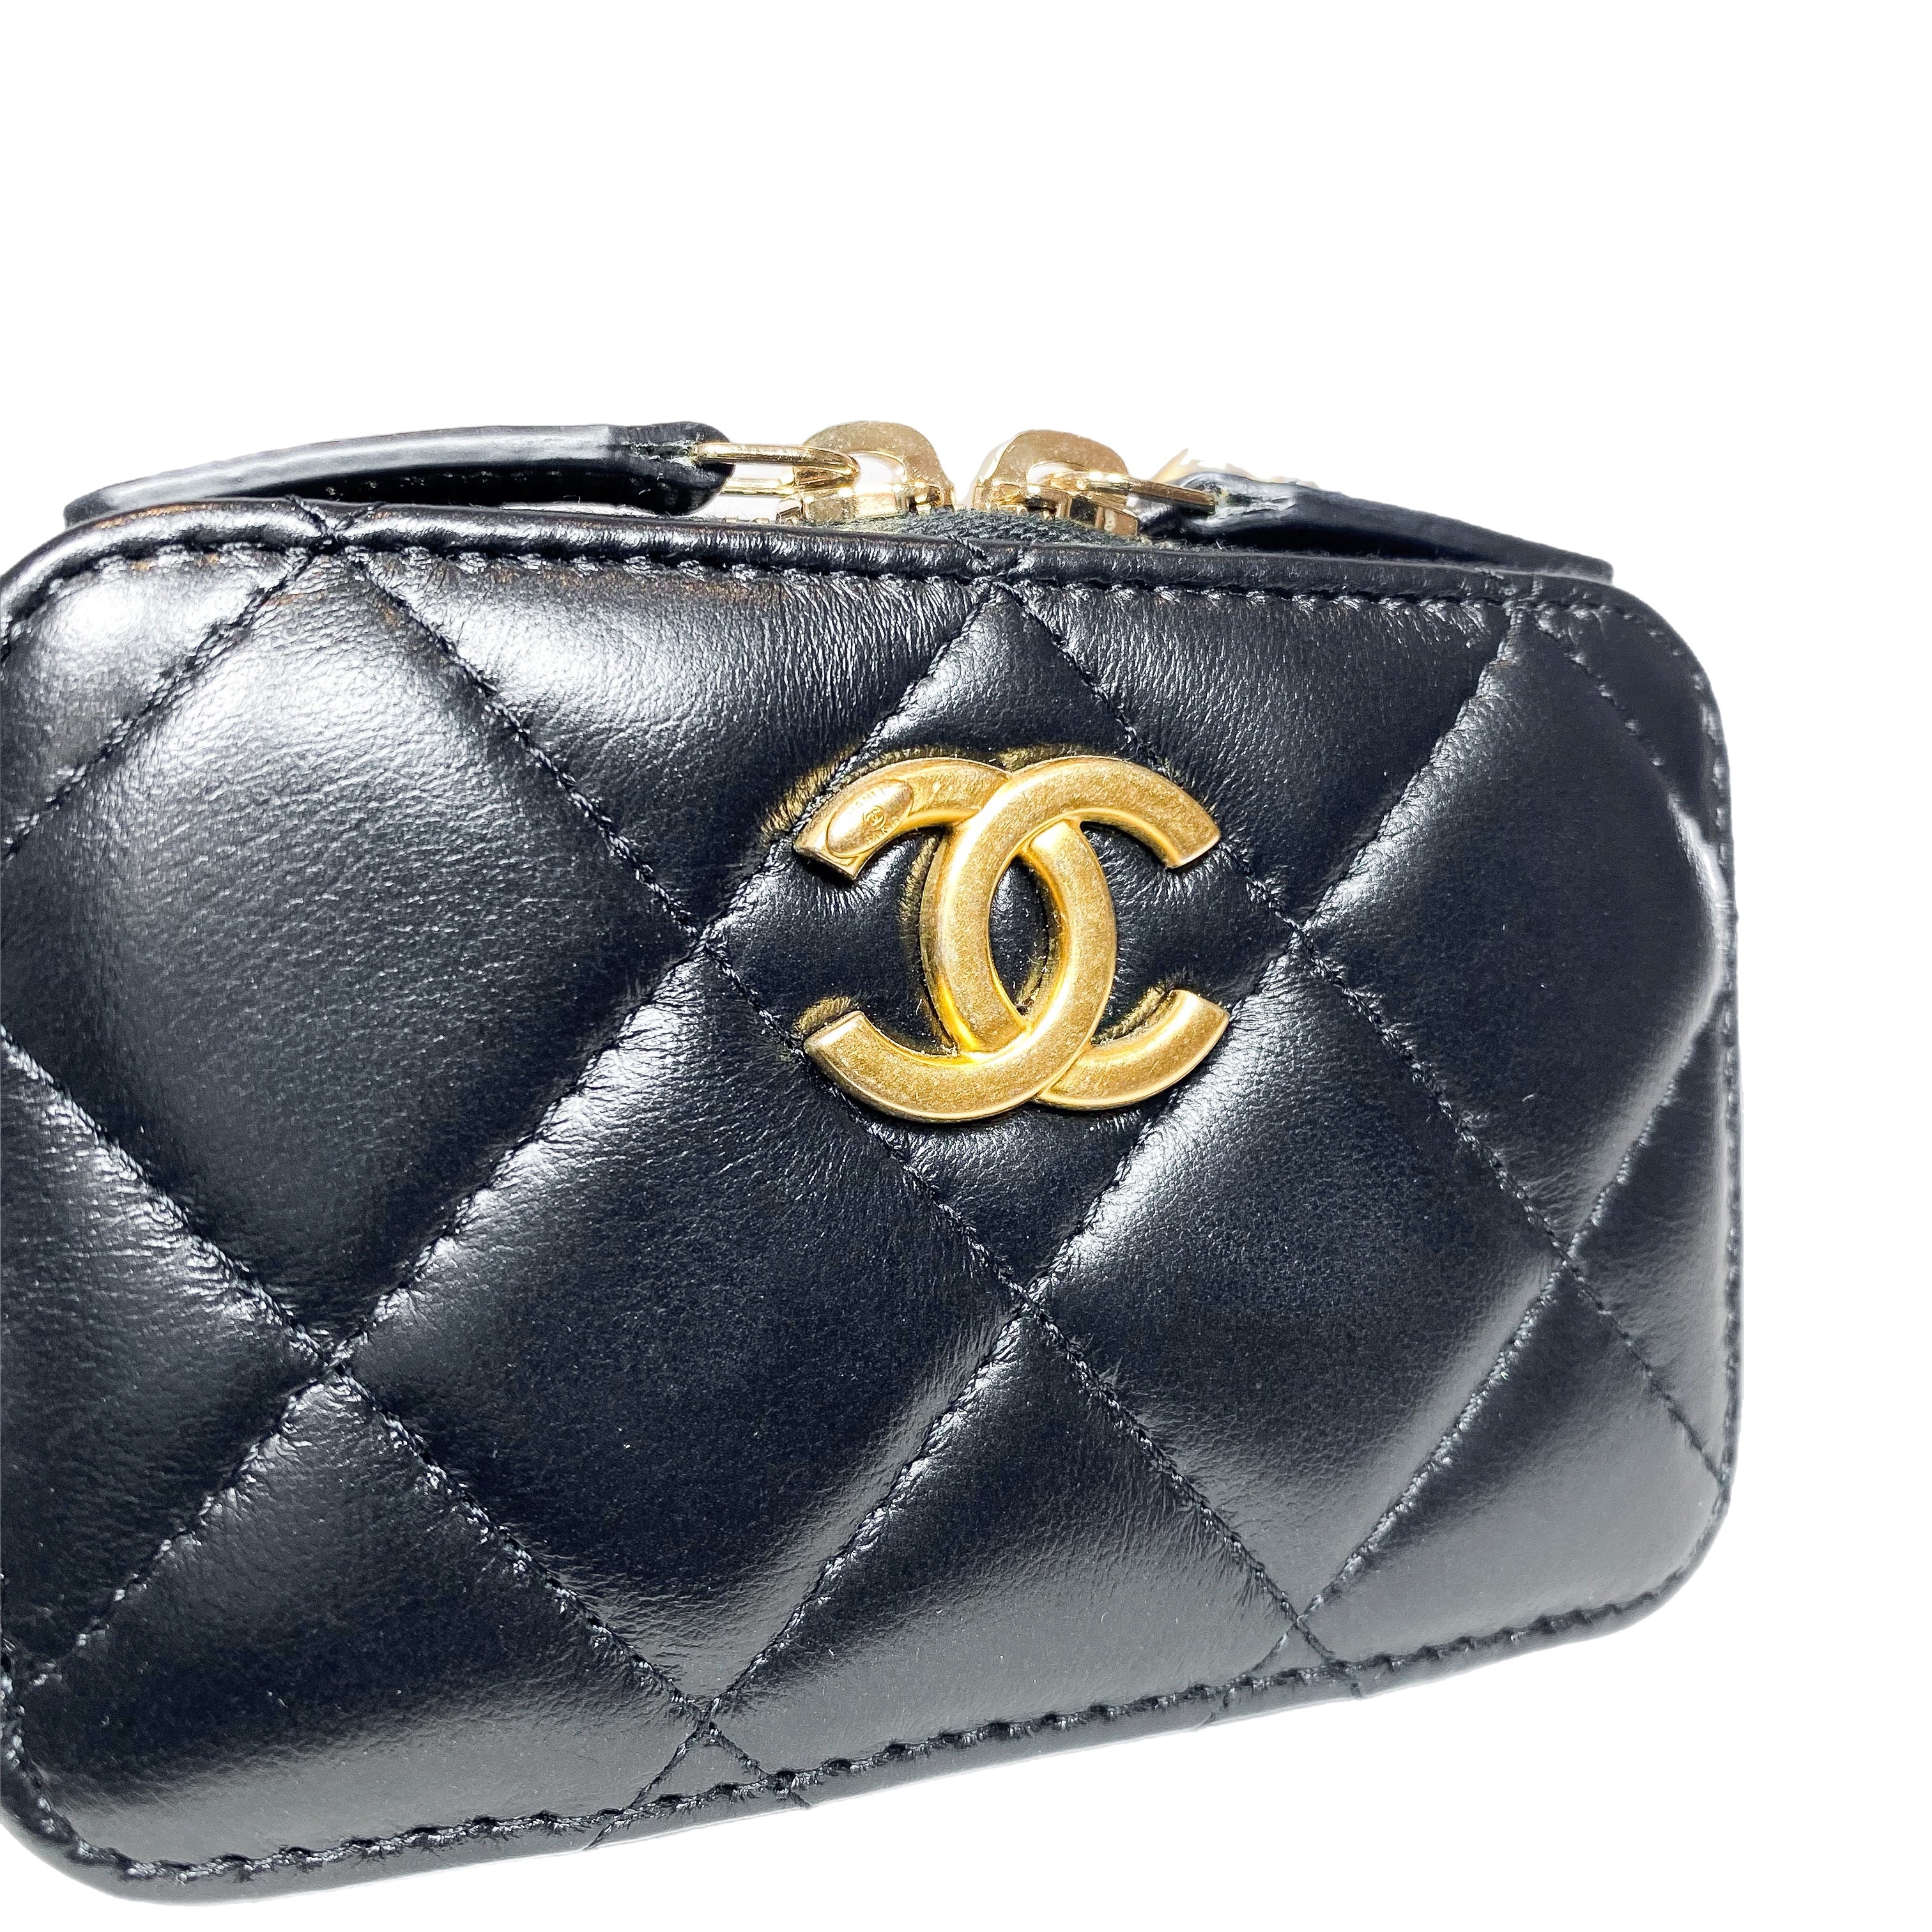 Chanel Black Quilted Mini Lacquered Chain Clutch